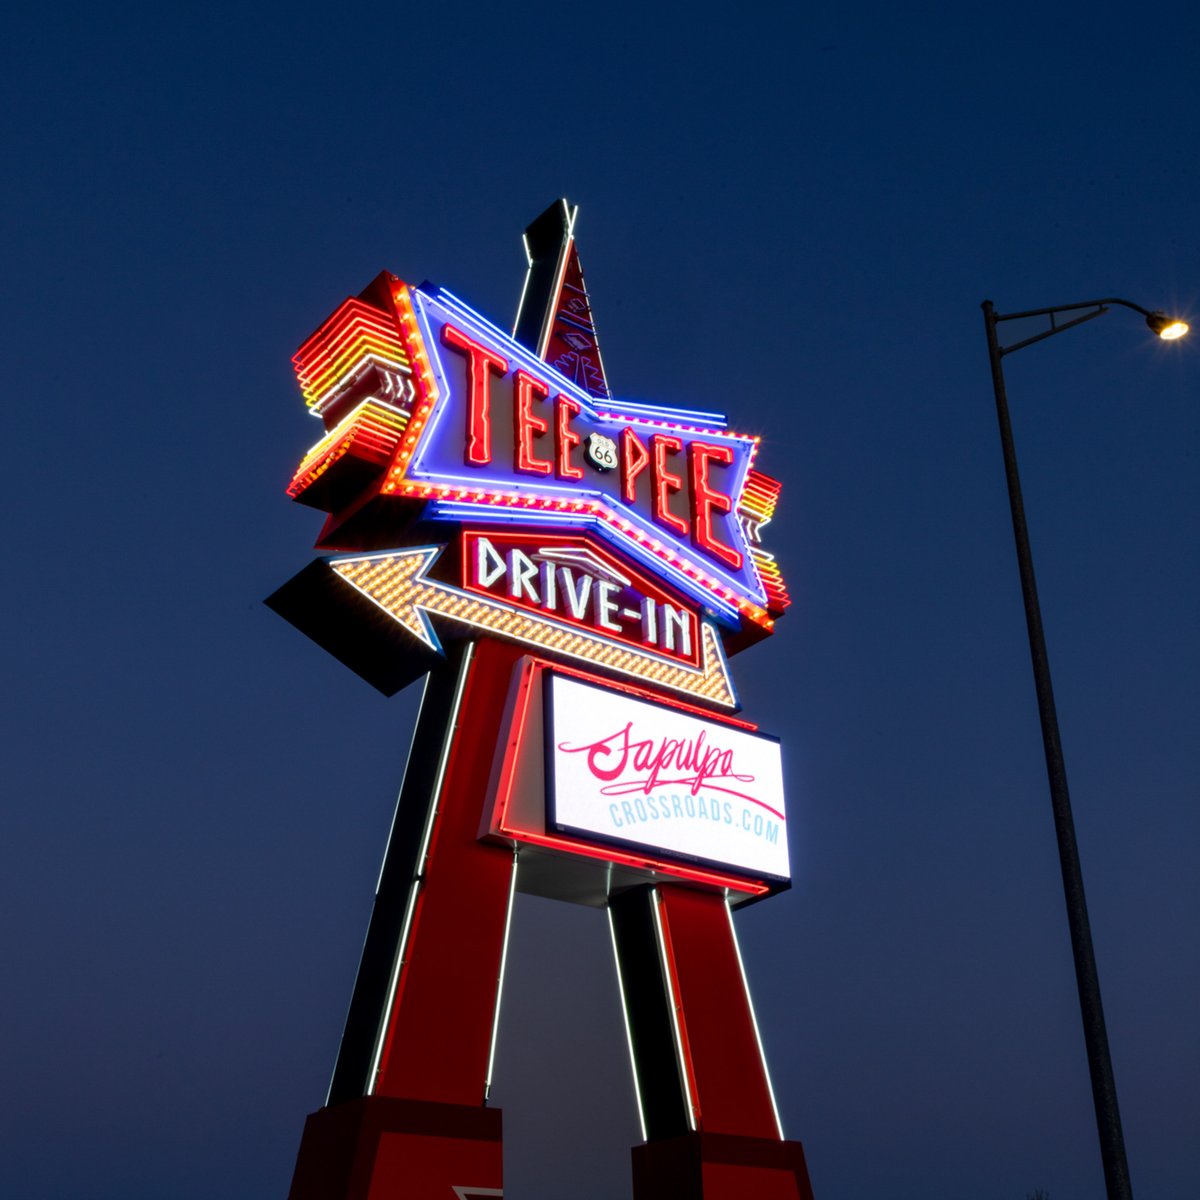 During your next road trip, stop by Tee Pee Drive-In! 🎥🍿

Experience the nostalgia of parking your car and watching a movie under the stars at this hidden Route 66 gem. 

Download our FREE Route 66 Guide & Passport here: travelok.la/Rt_66Passport